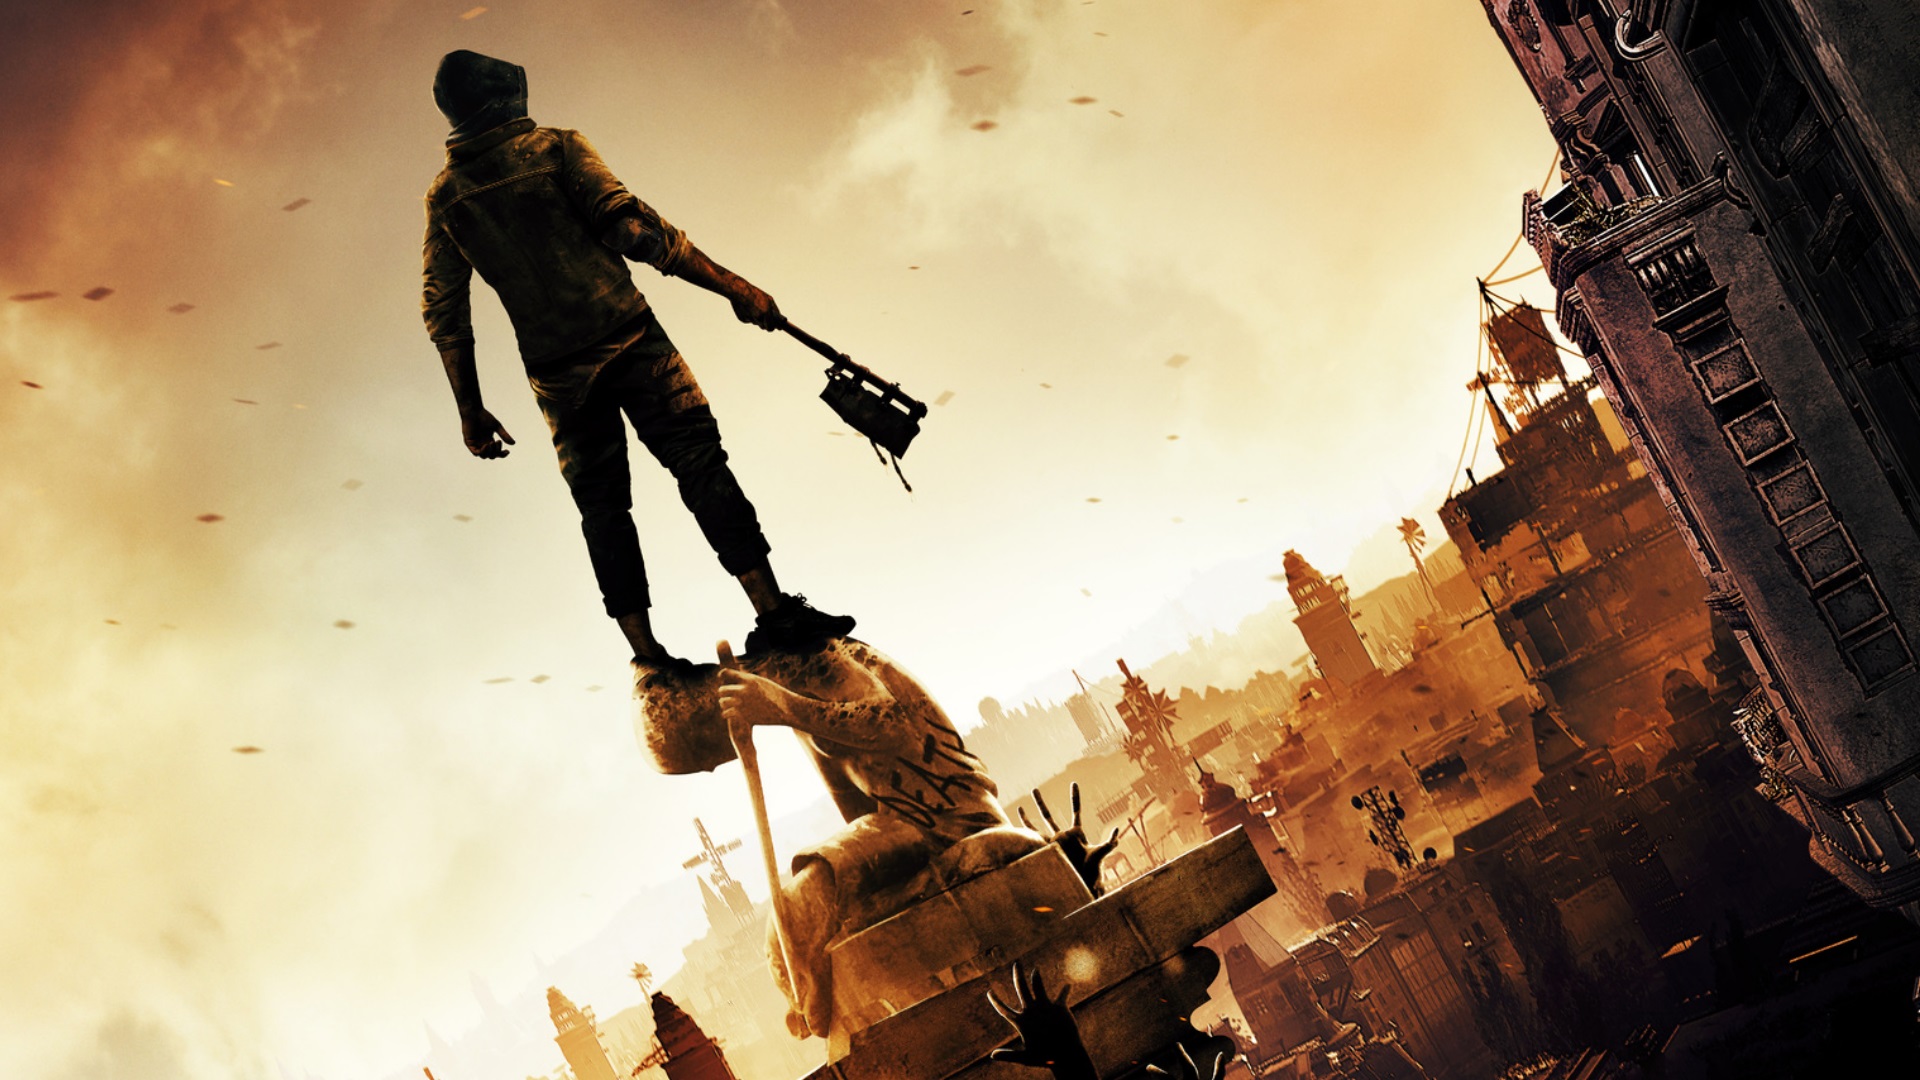 Dying Light 2 The Reason Trailer, 4 Player Co-op Confirmed - Niche Gamer